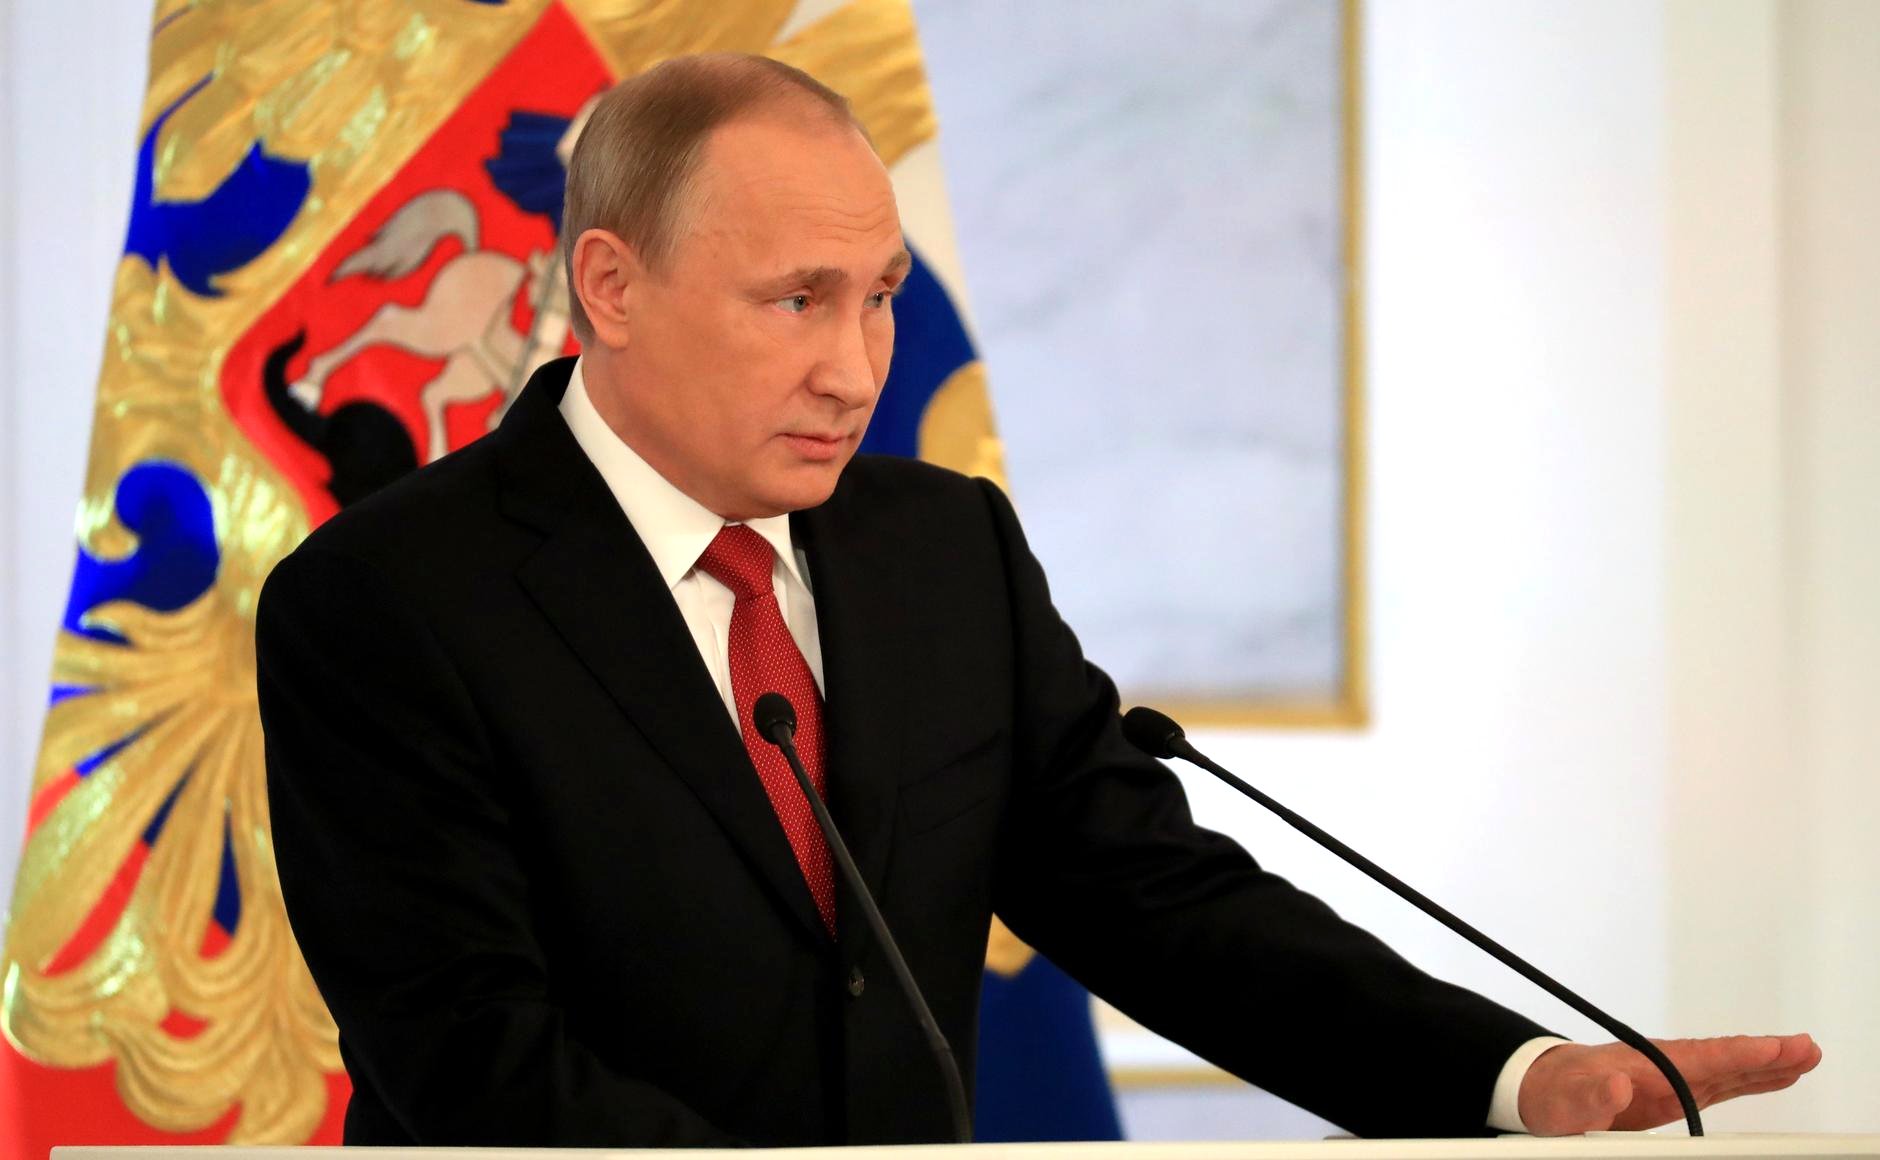 Putin at the podium describing the terms of his constitutional authority to use nuclear weapons.